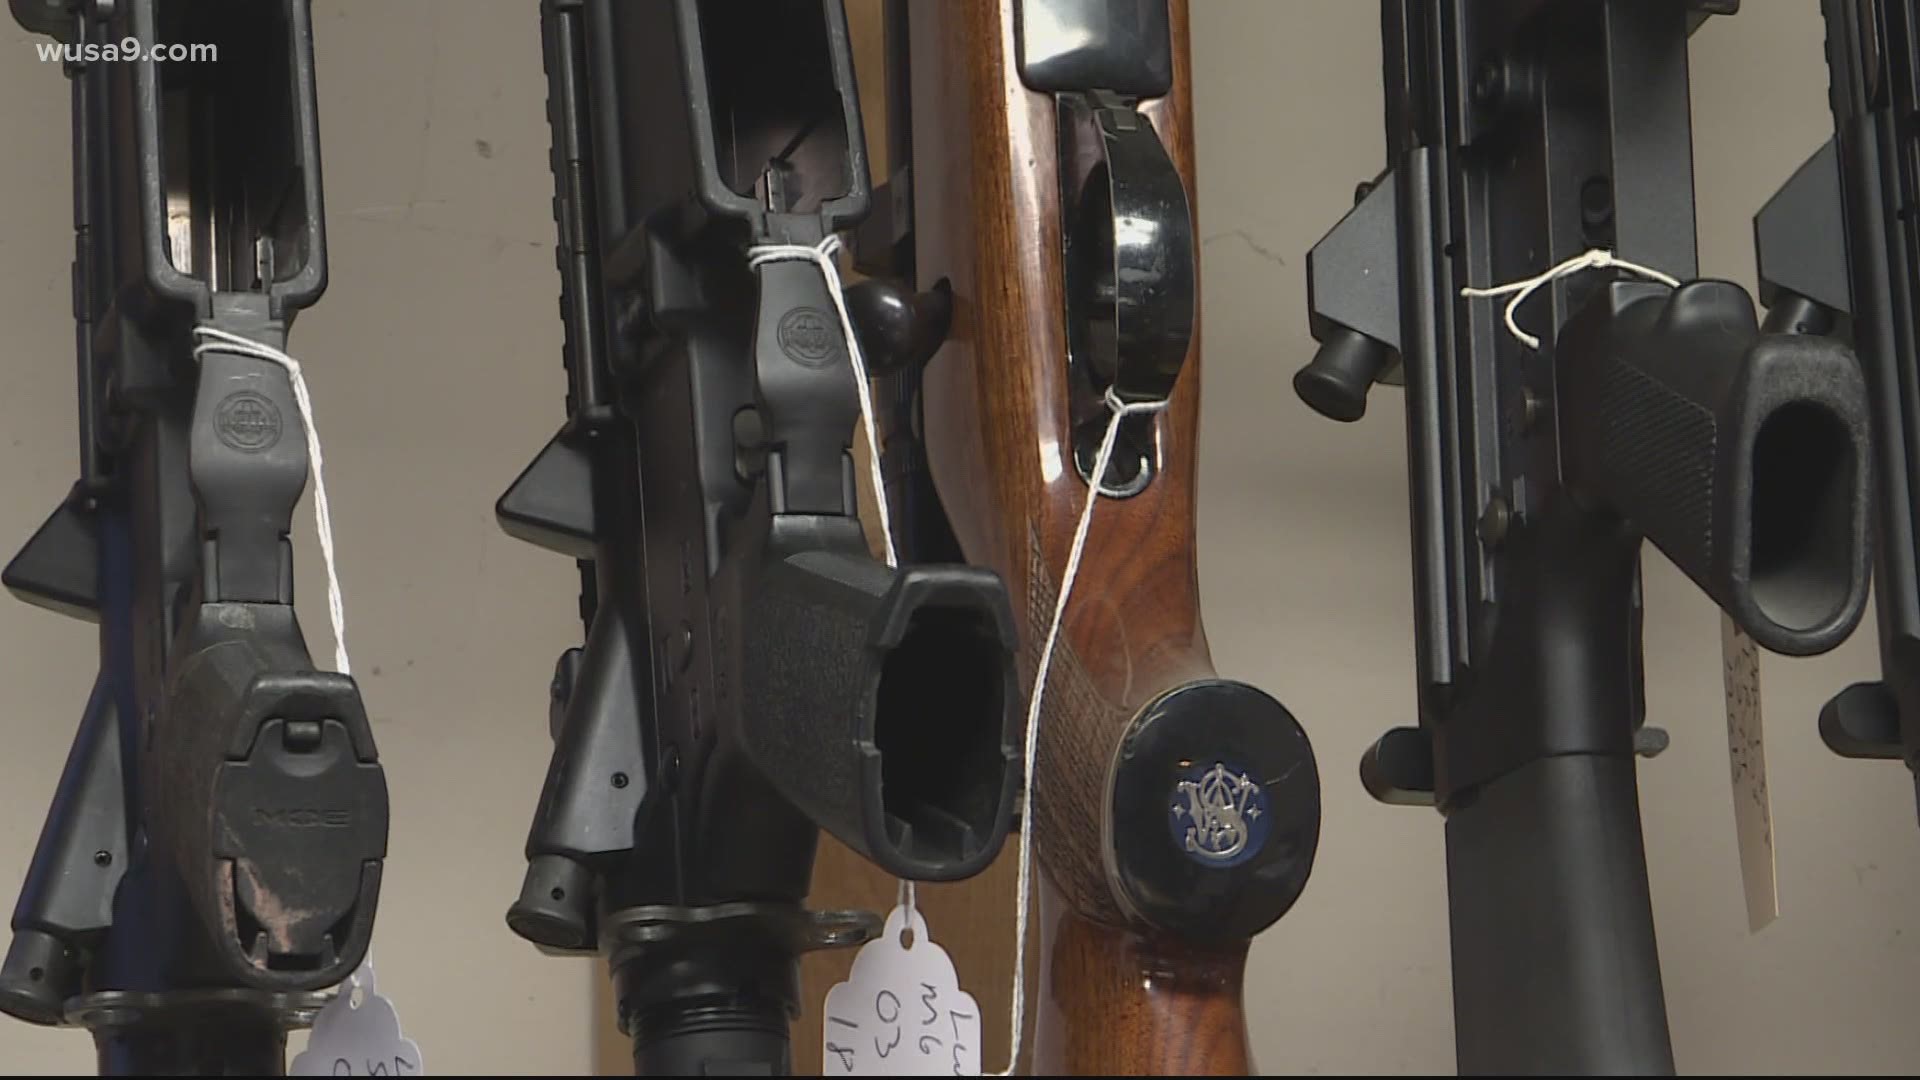 Gun stores in Virginia are adjusting to new laws that commonwealth legislators have put in place for the state.